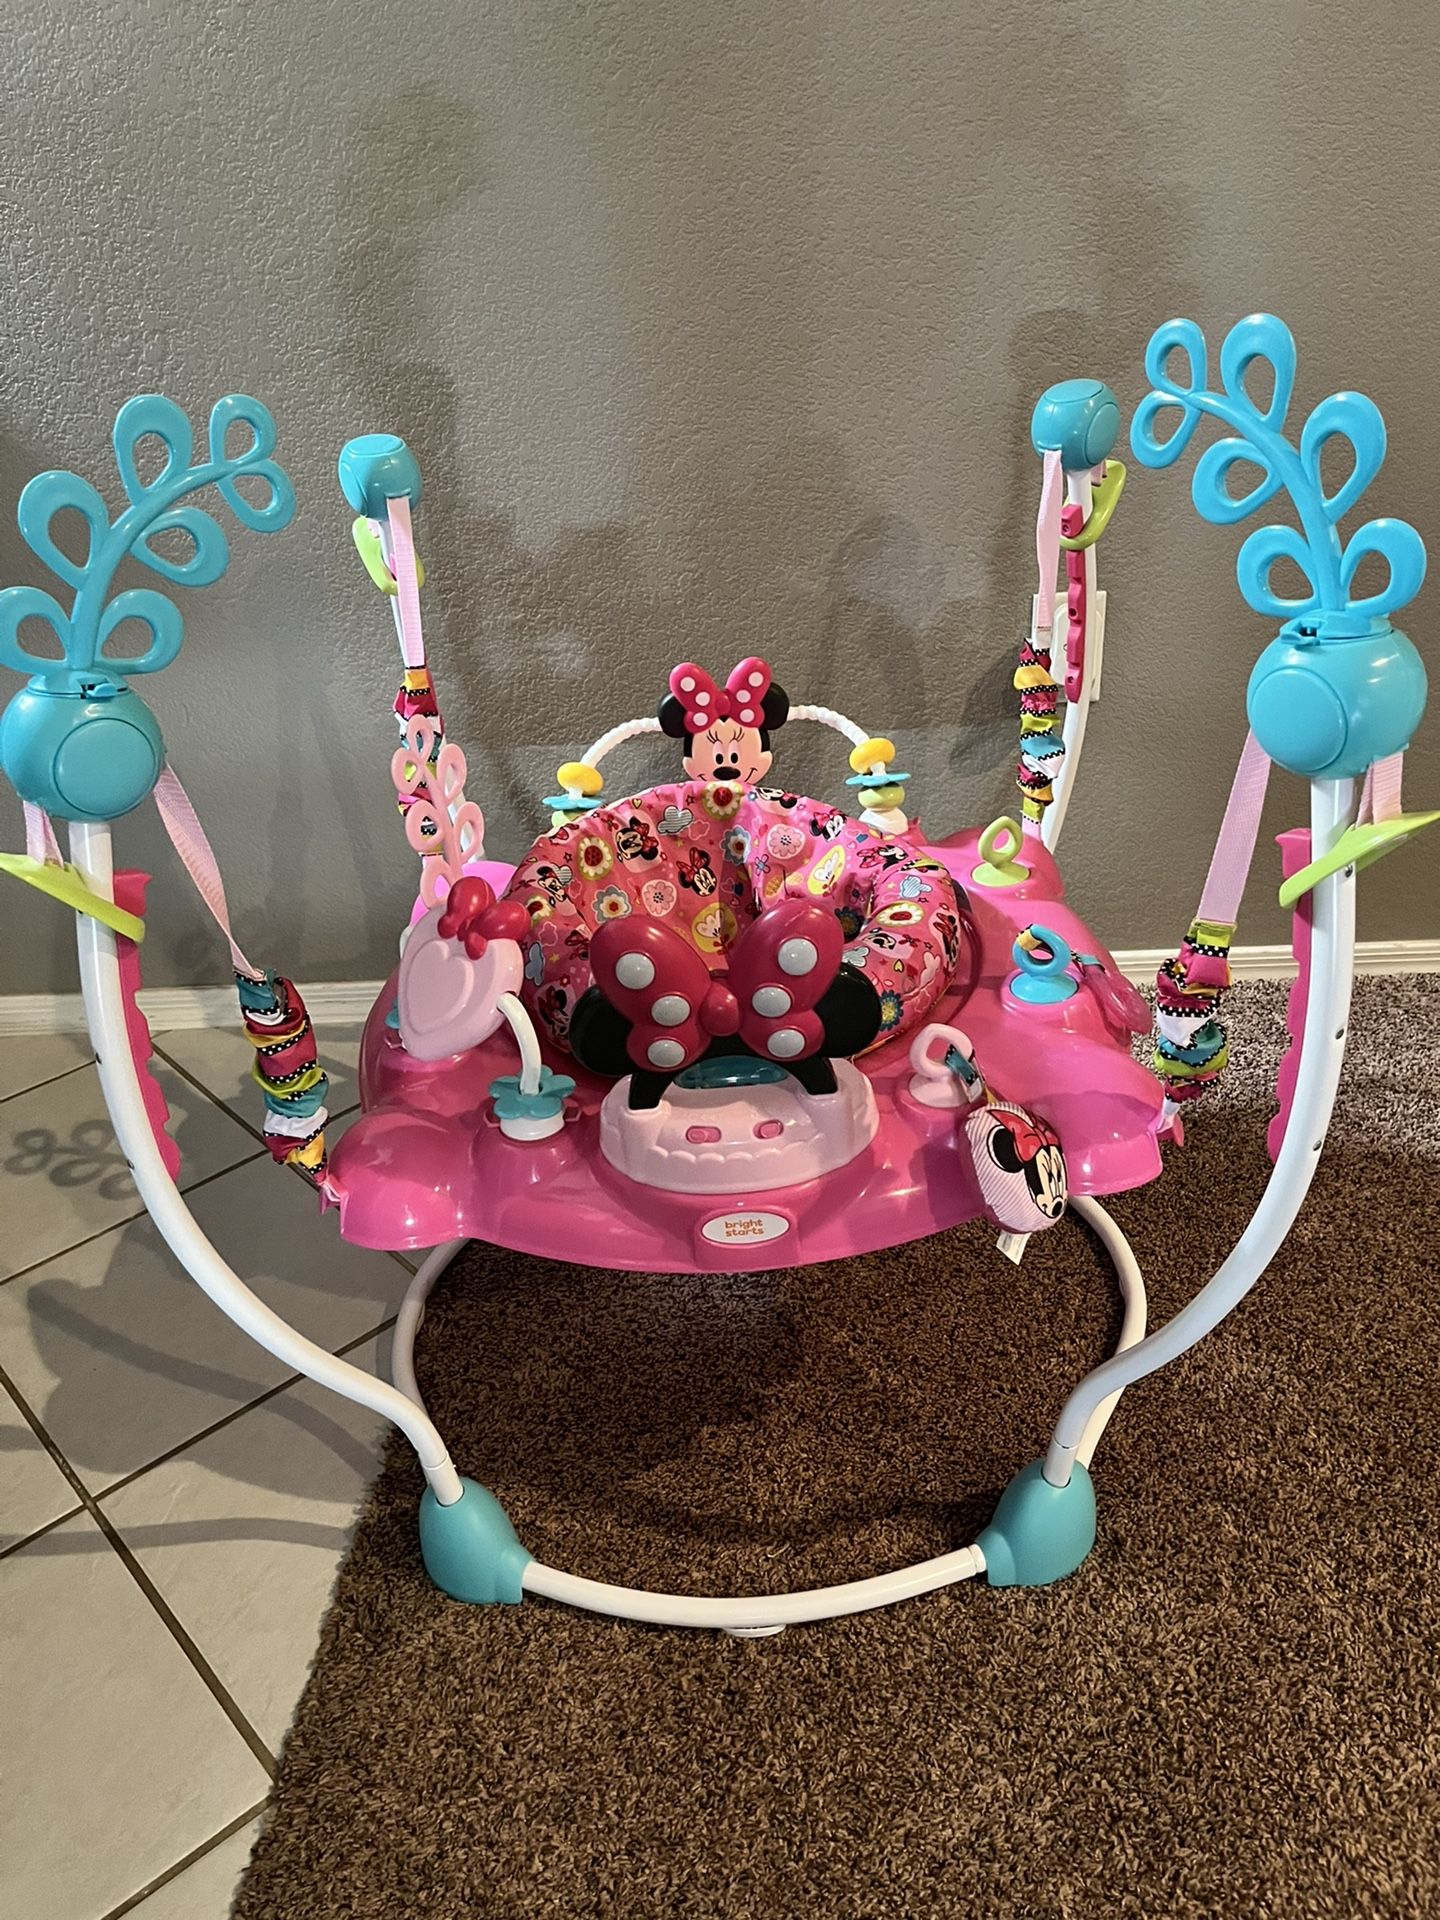 Activity Jumper Bouncer with Lights & Music, Age 6 months+